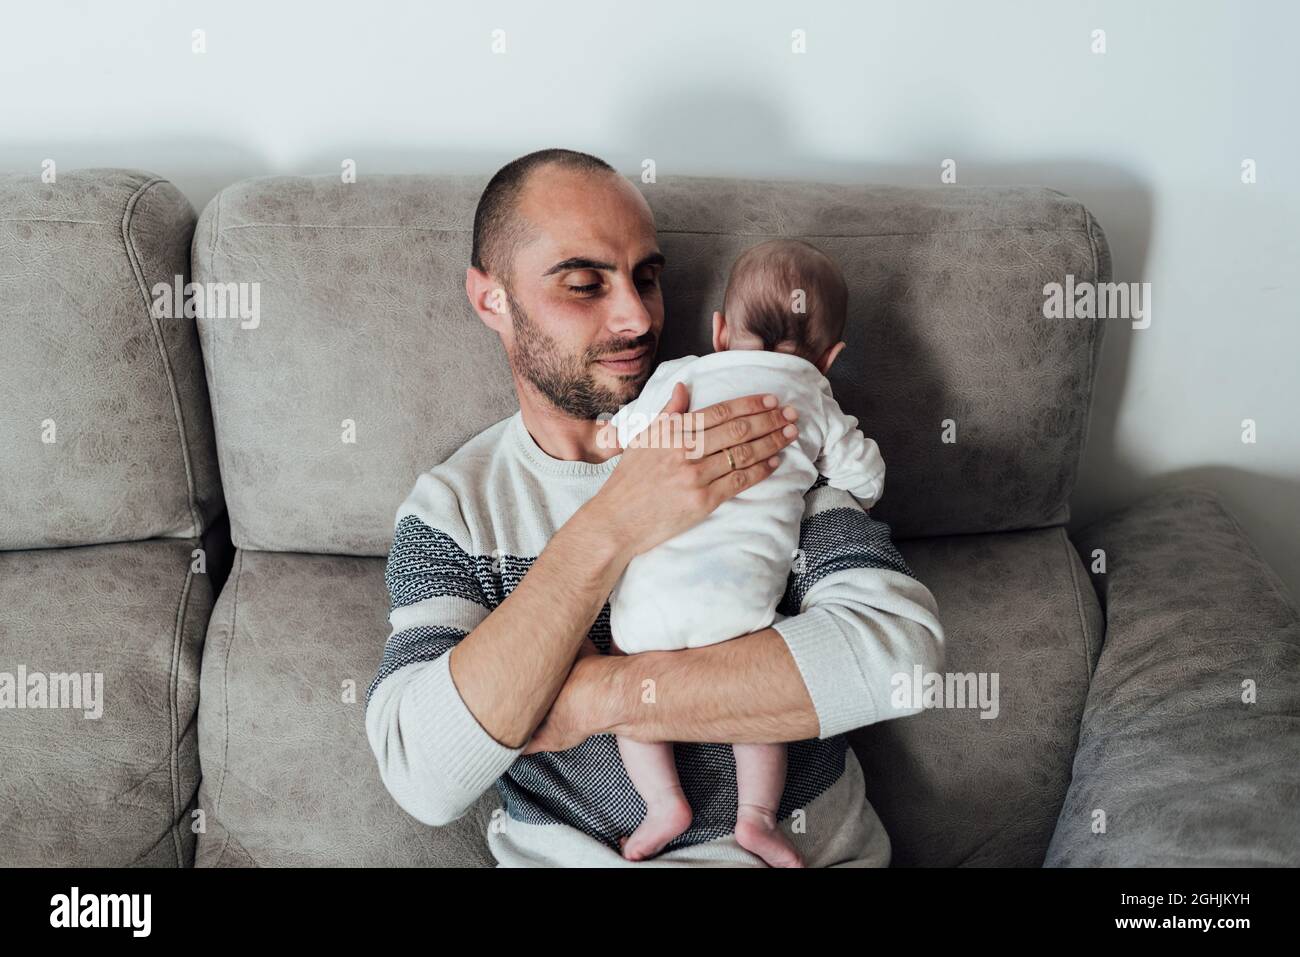 Father holding a baby in his arms while sitting on a sofa at home. Stock Photo